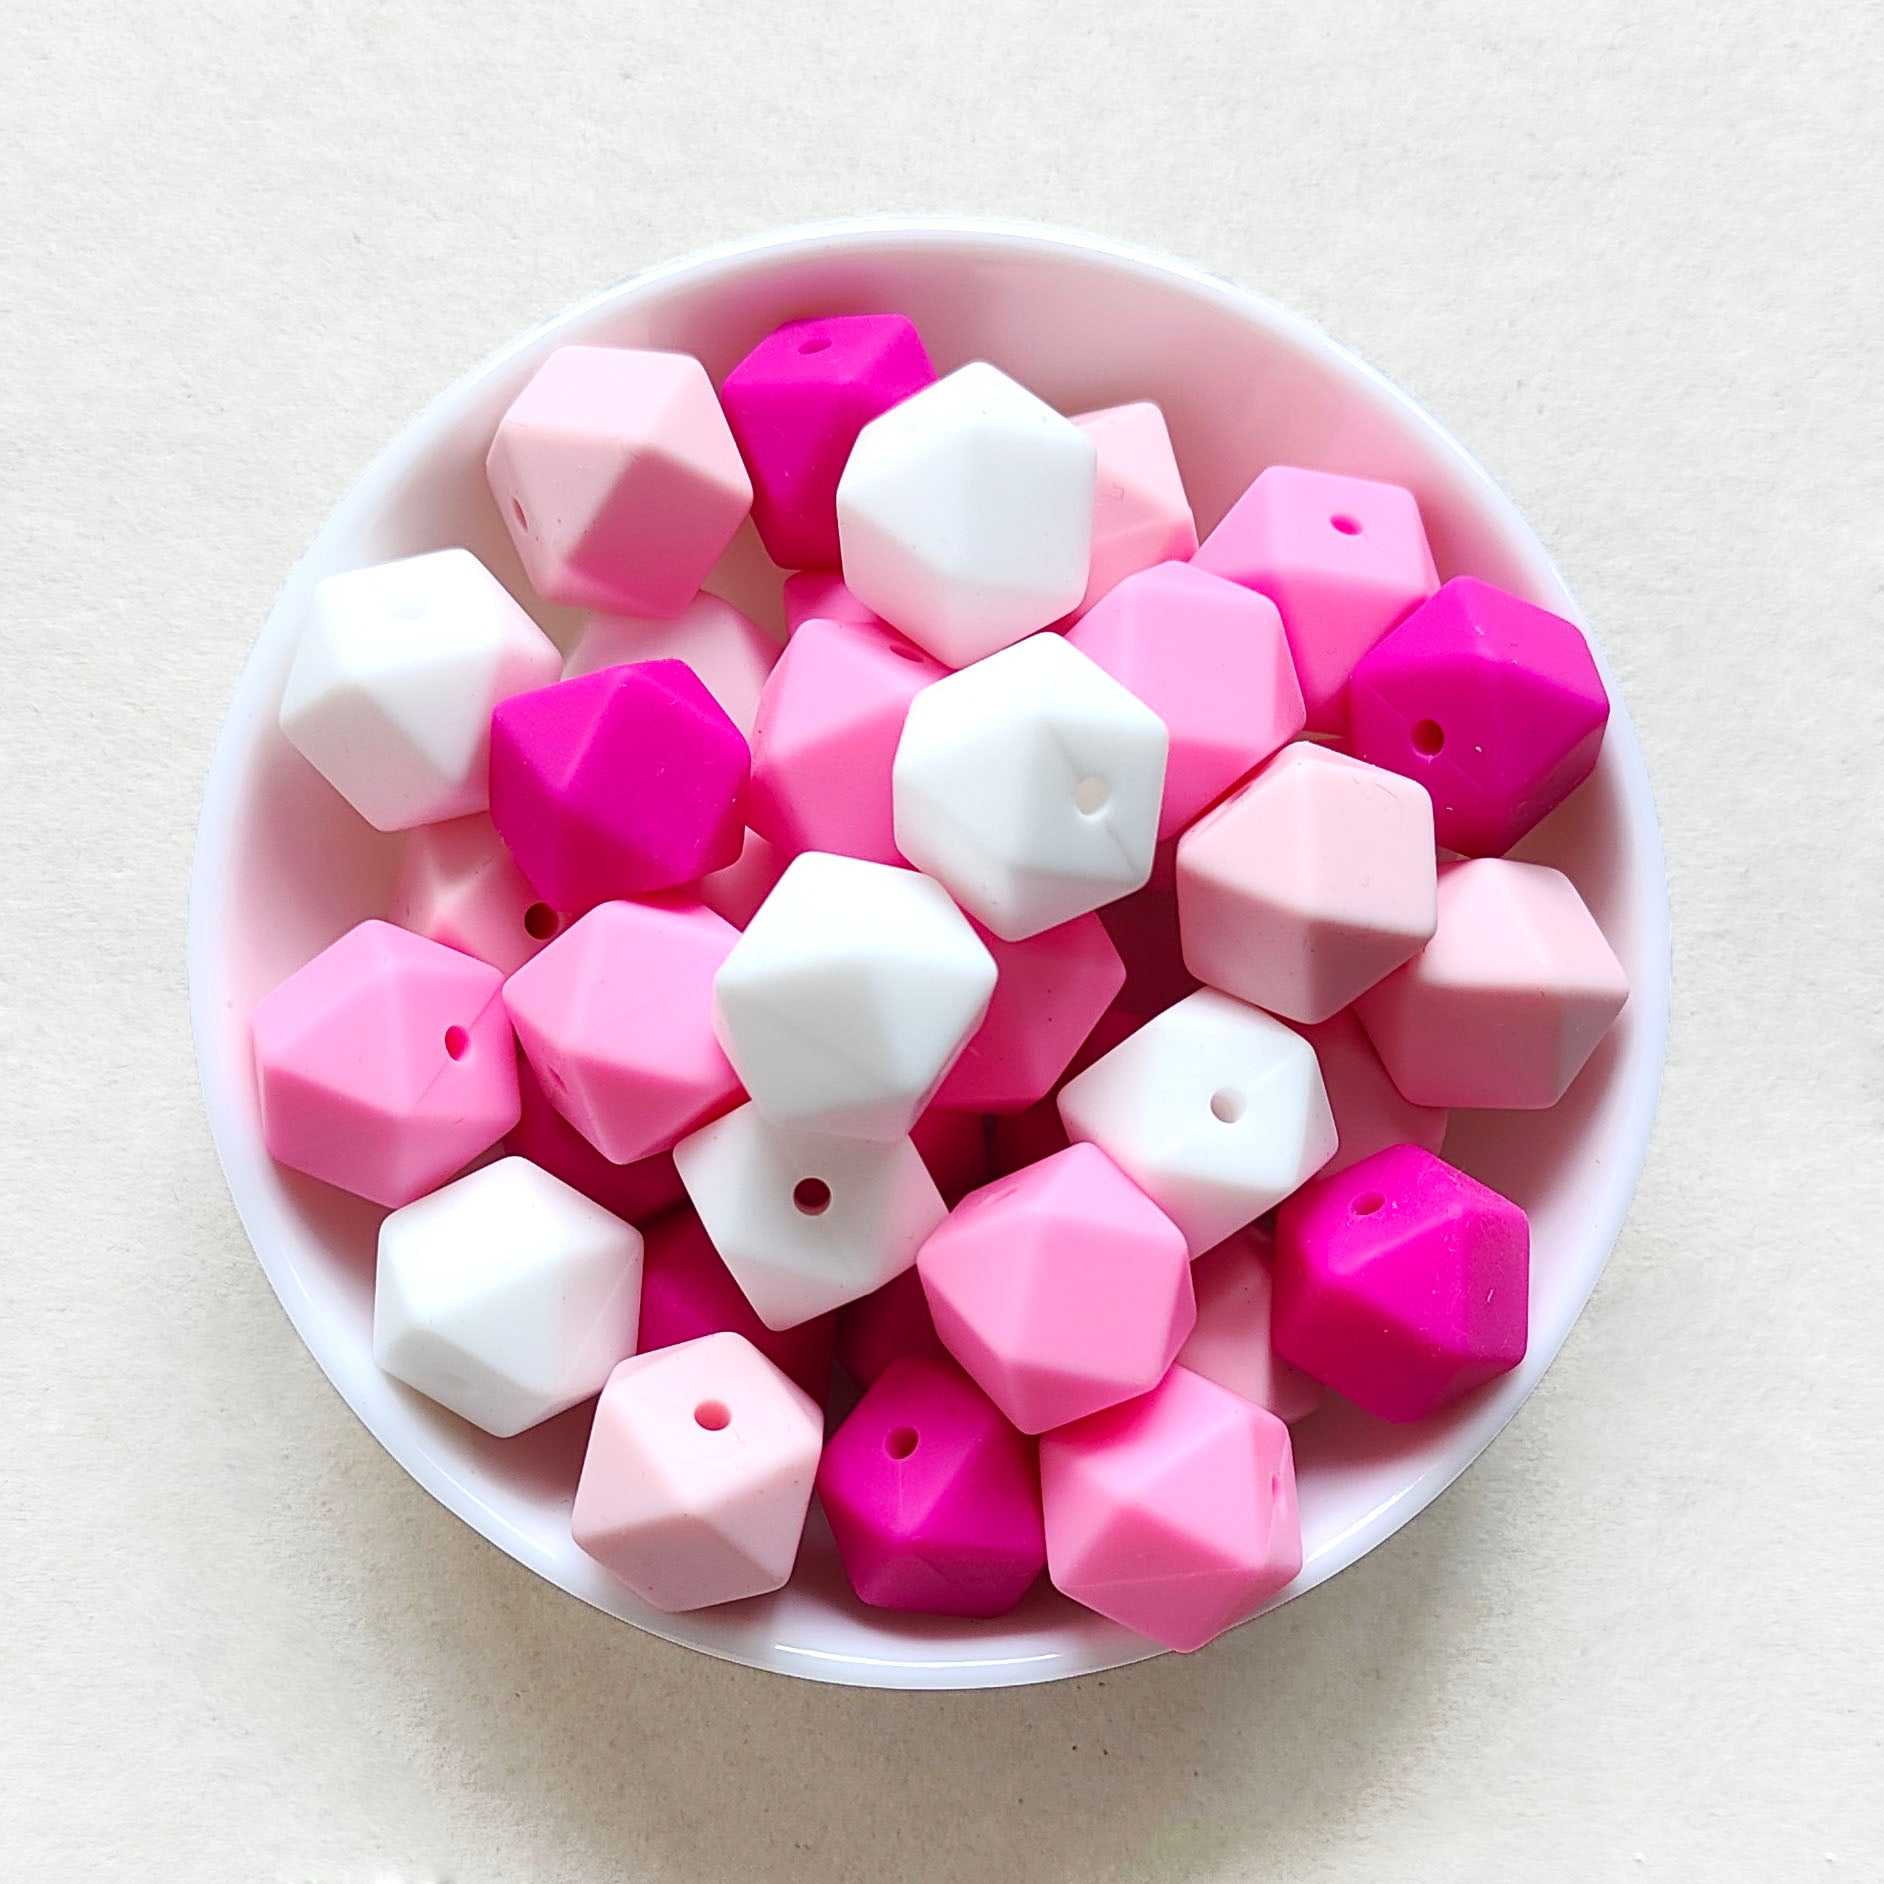 14mm Mix 4 Colors Hexagon Silicone Beads